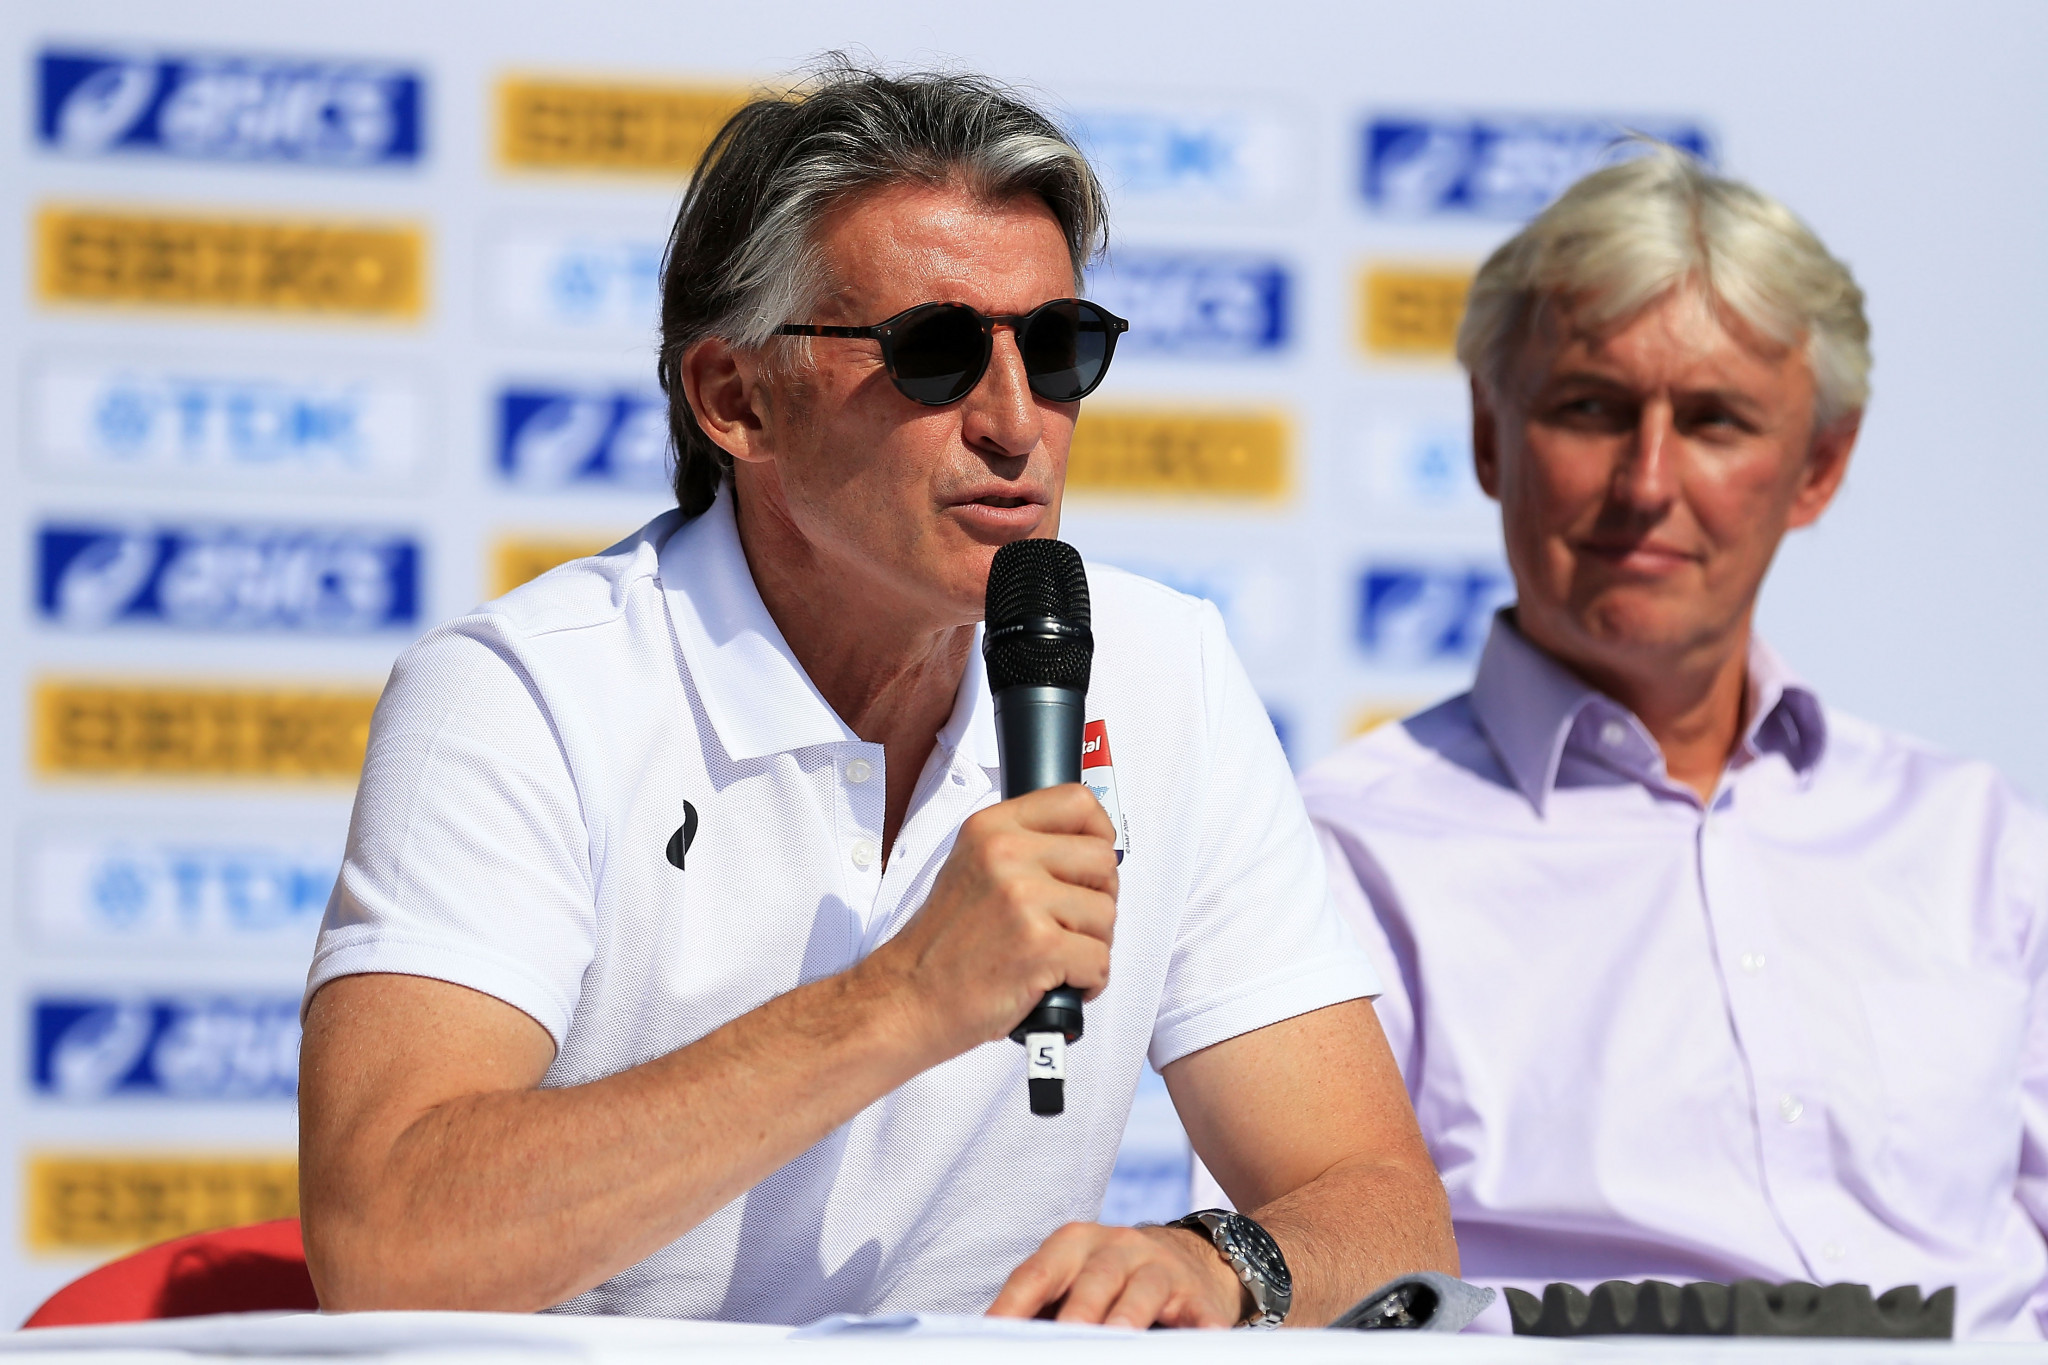 IAAF President Sebastian Coe said the new rules were brought in to protect athletes from abuses committed 